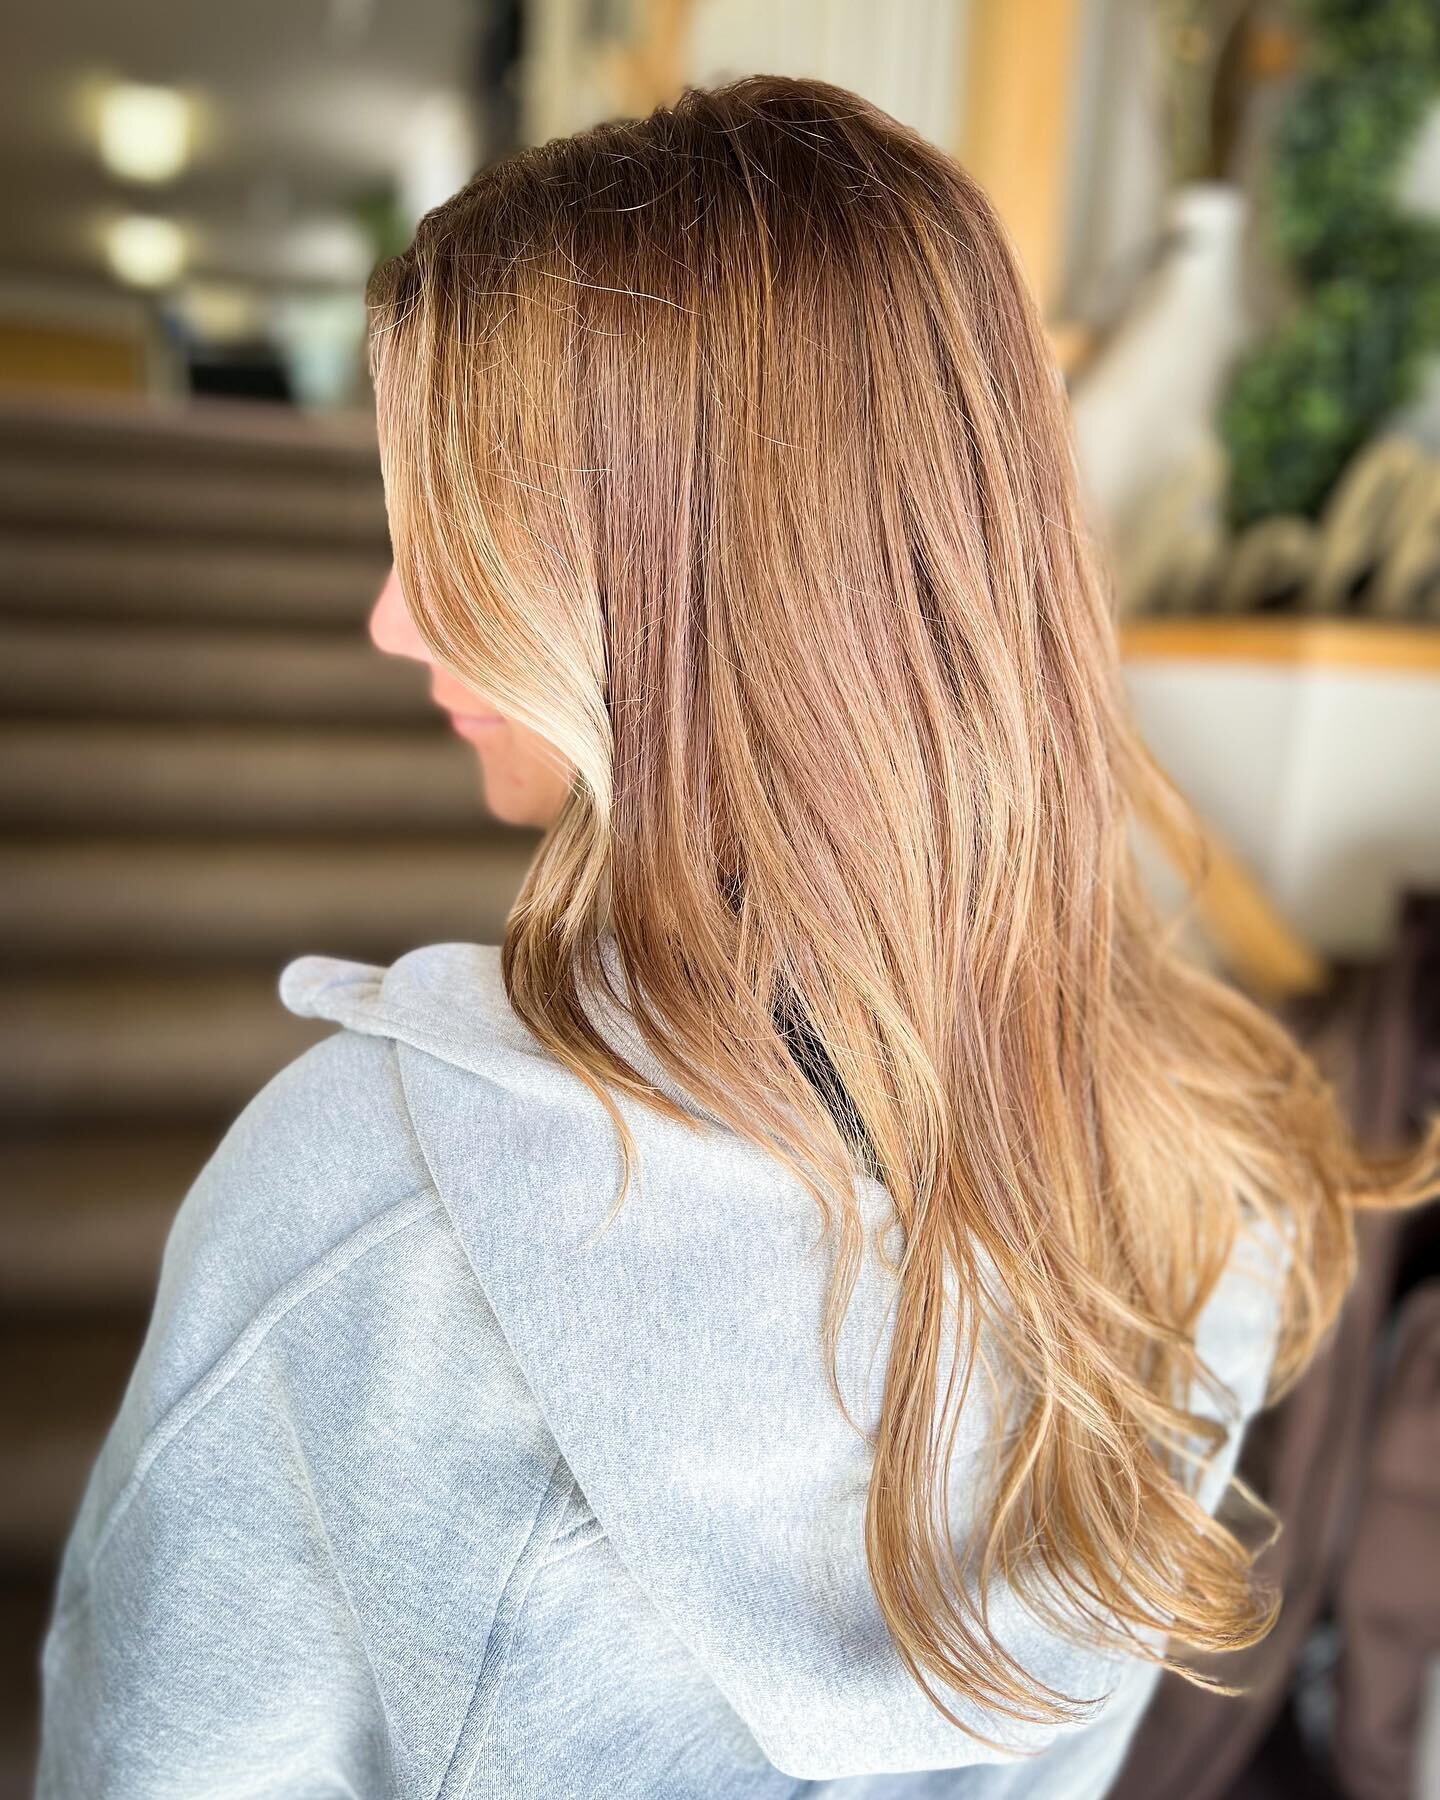 From bright blonde to melted. Come get this gorgeous lived in look.. I love this color! 

#gorgeous#hair#balayage#hairstyles#haircolor#goodvibes#glenwoodhotsprings